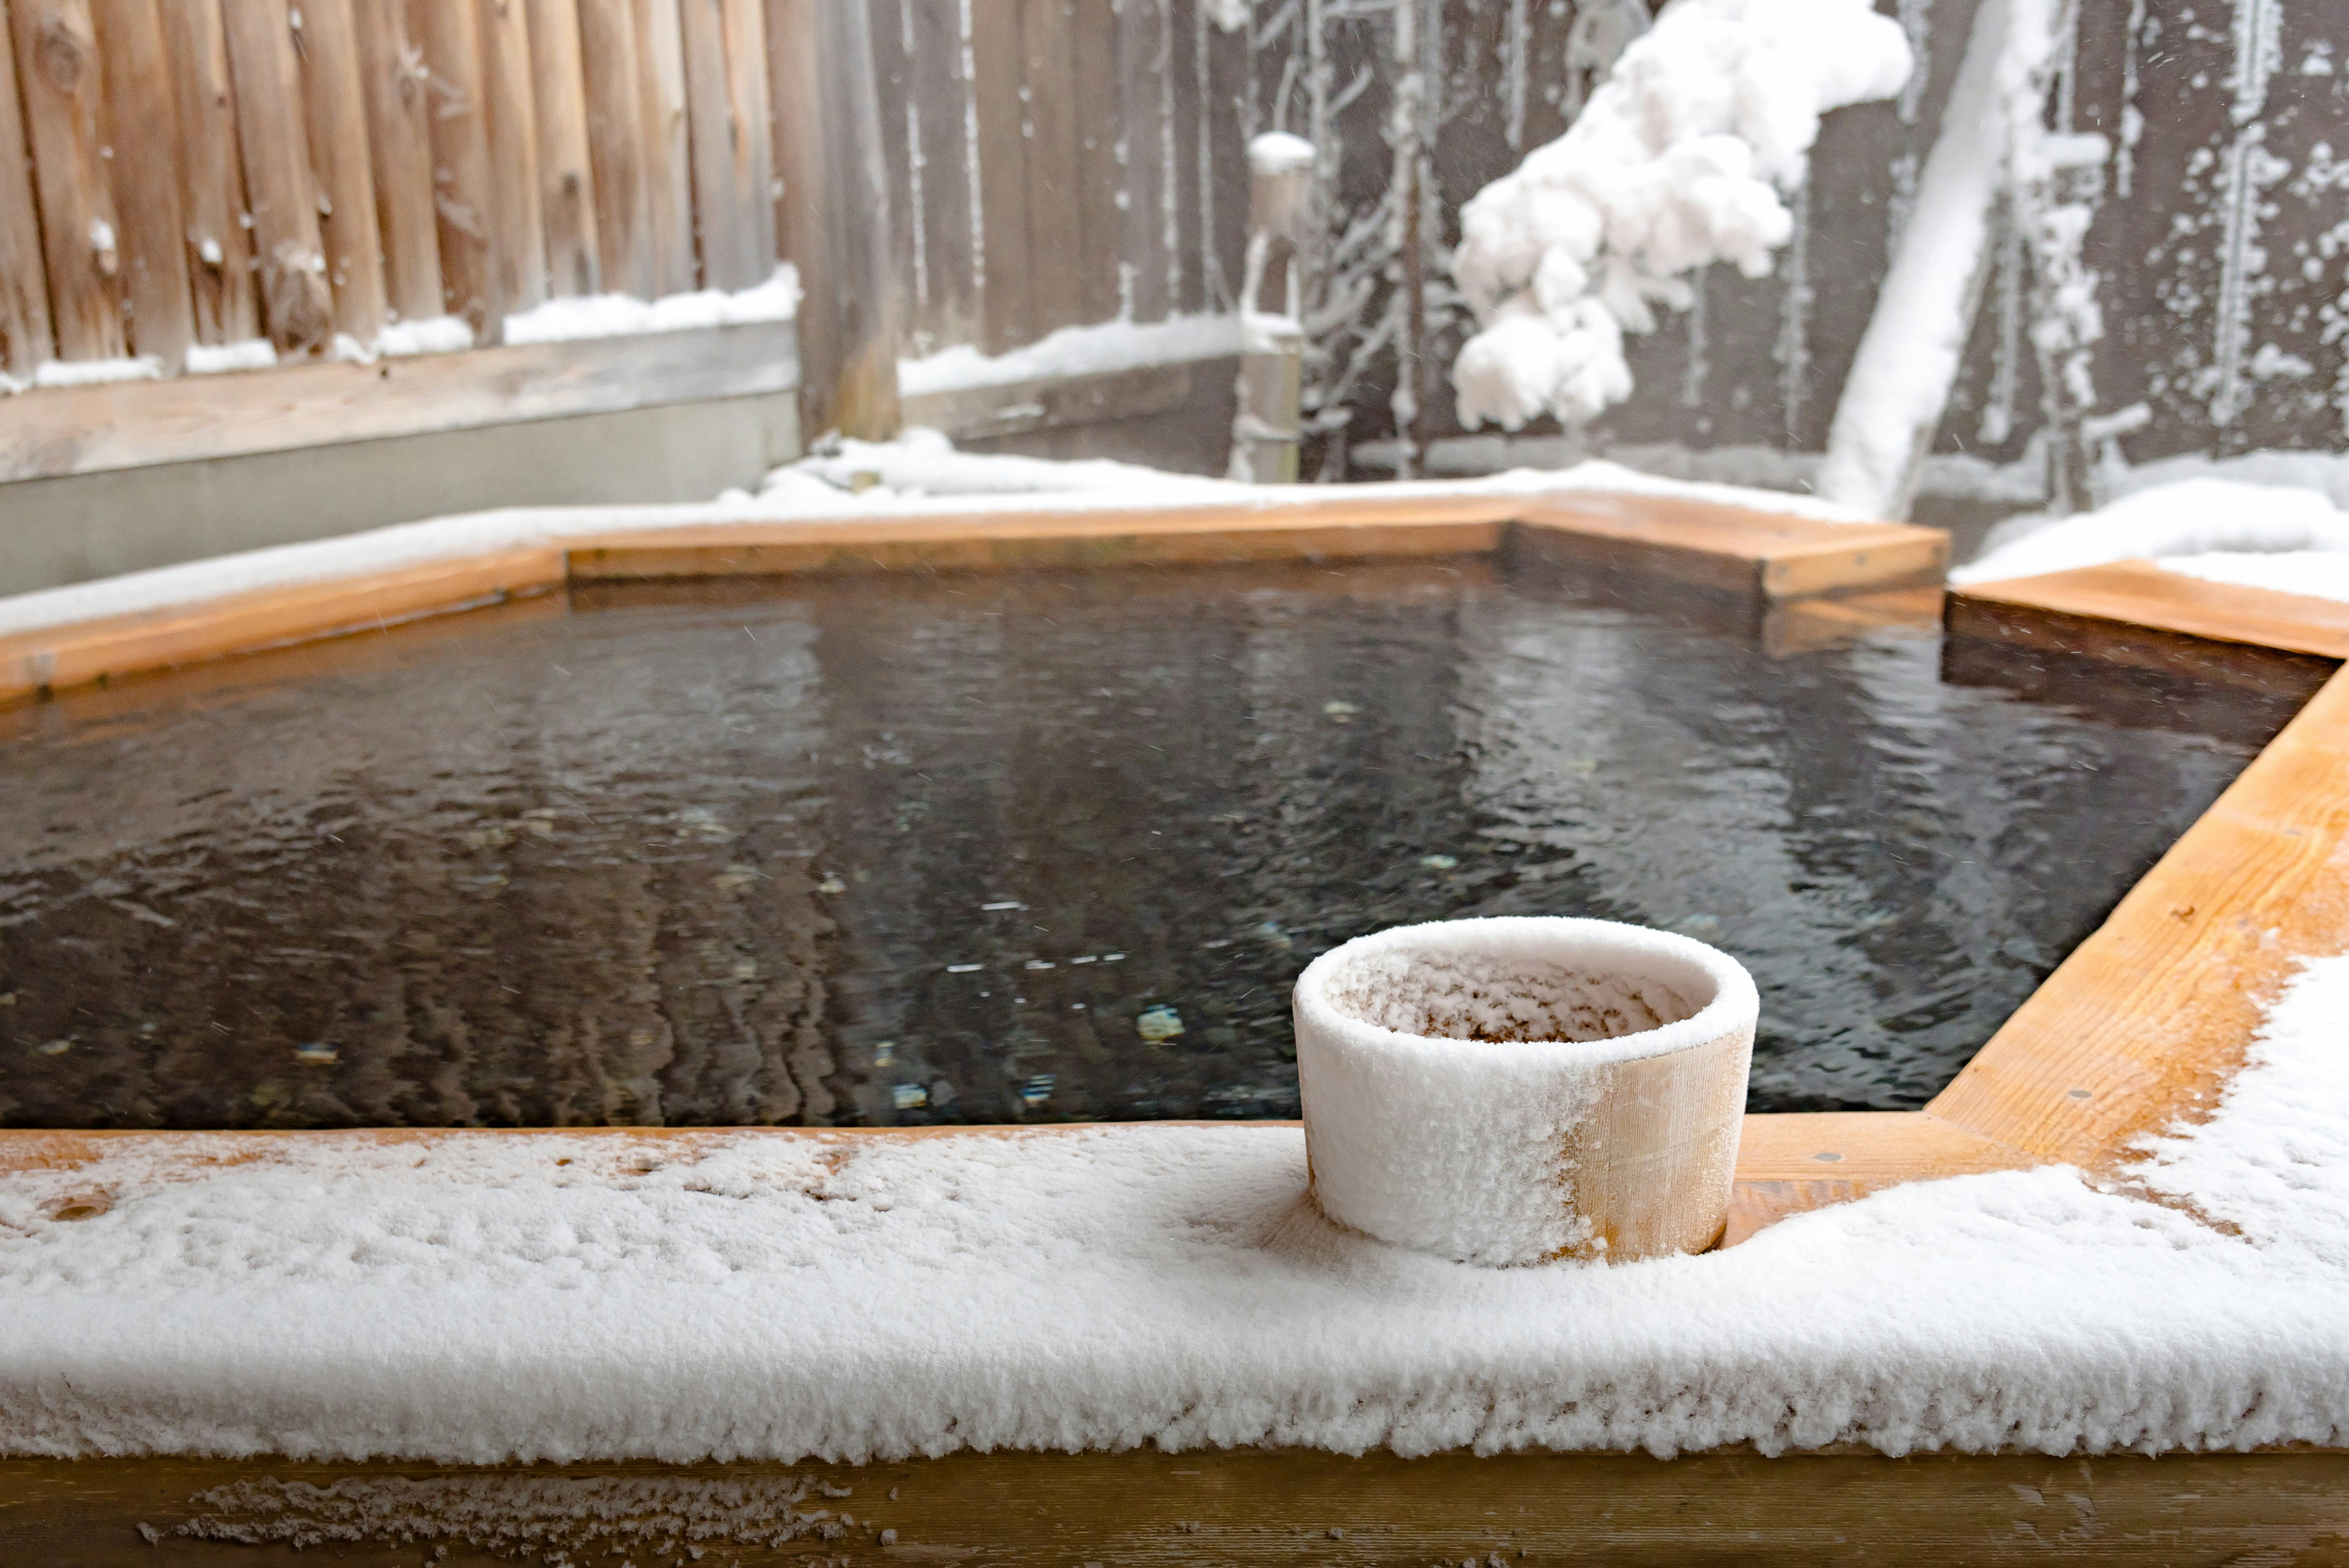 A traditional wooden Japanese outdoor onsen, which is surrounded by snowy countryside.